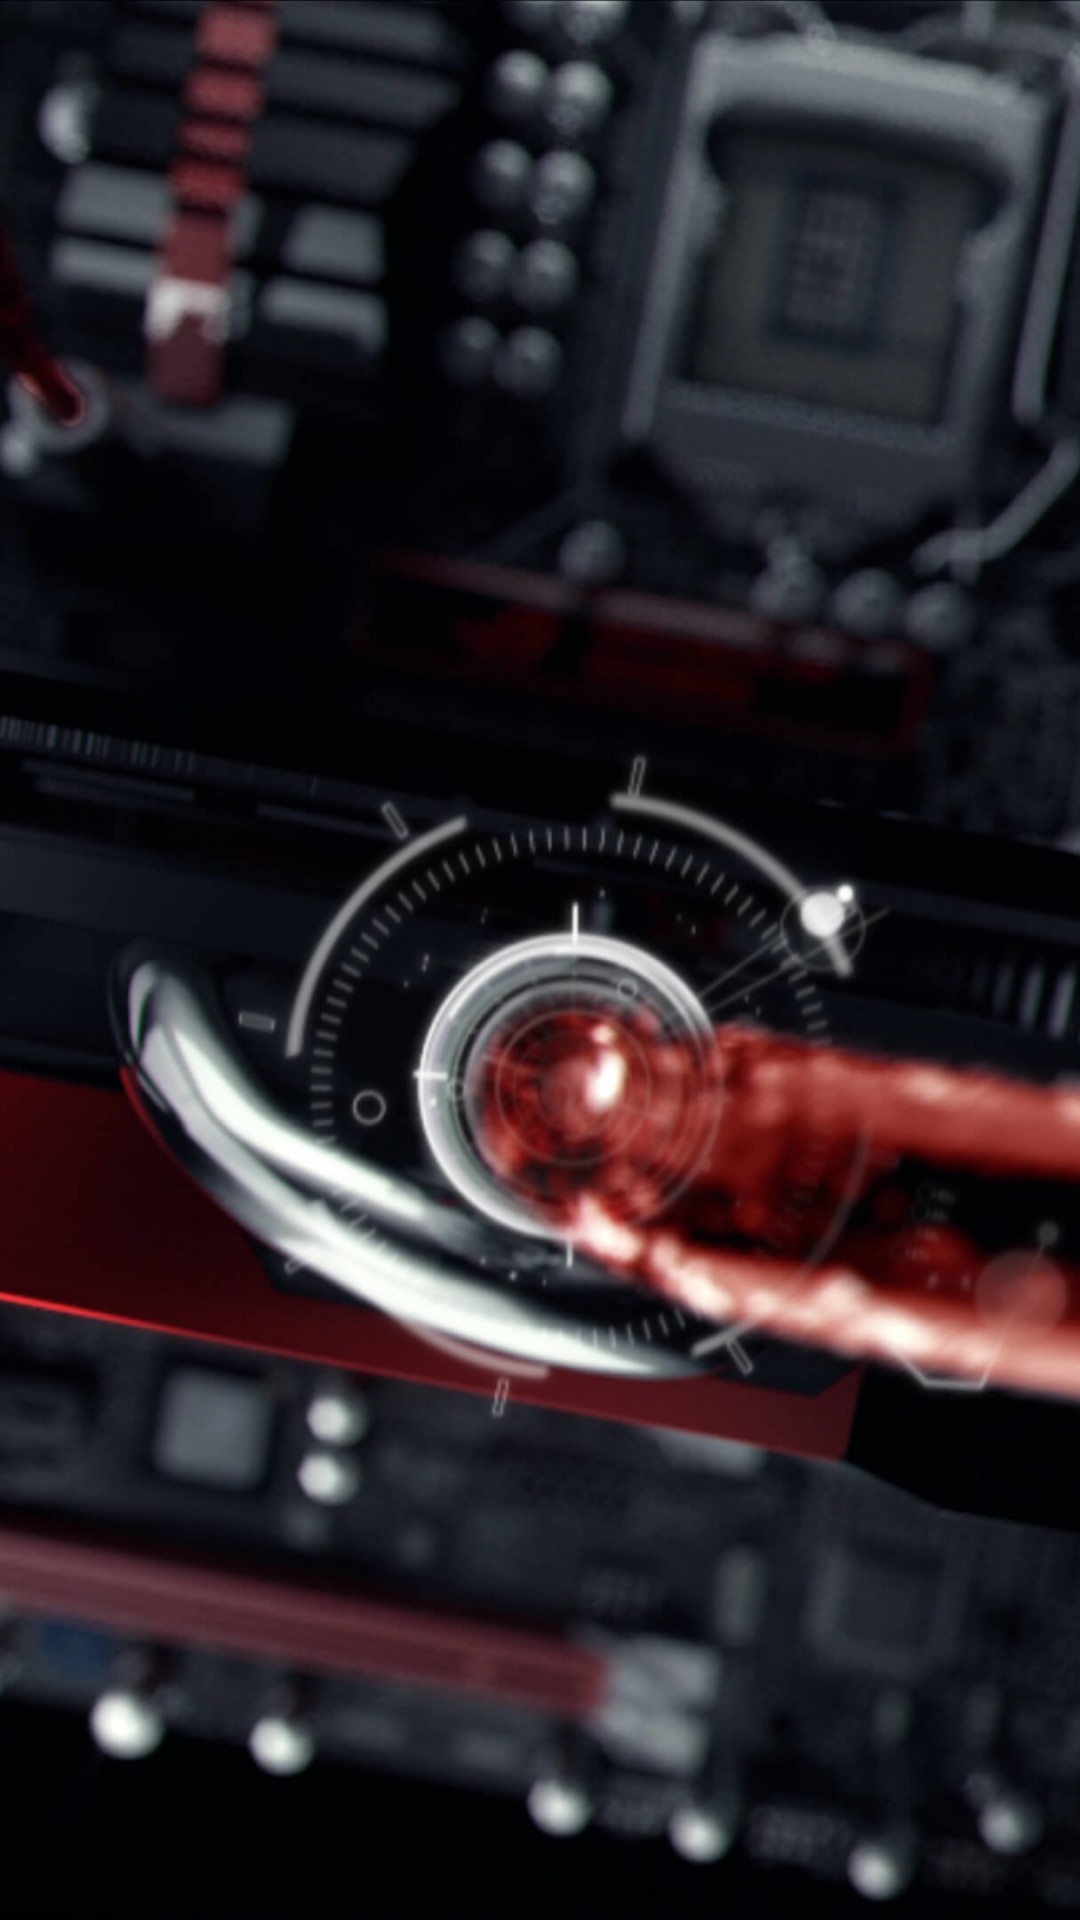 ASUS ROG Poseidon Liquid Cooling Wallpaper for SONY Xperia Z1